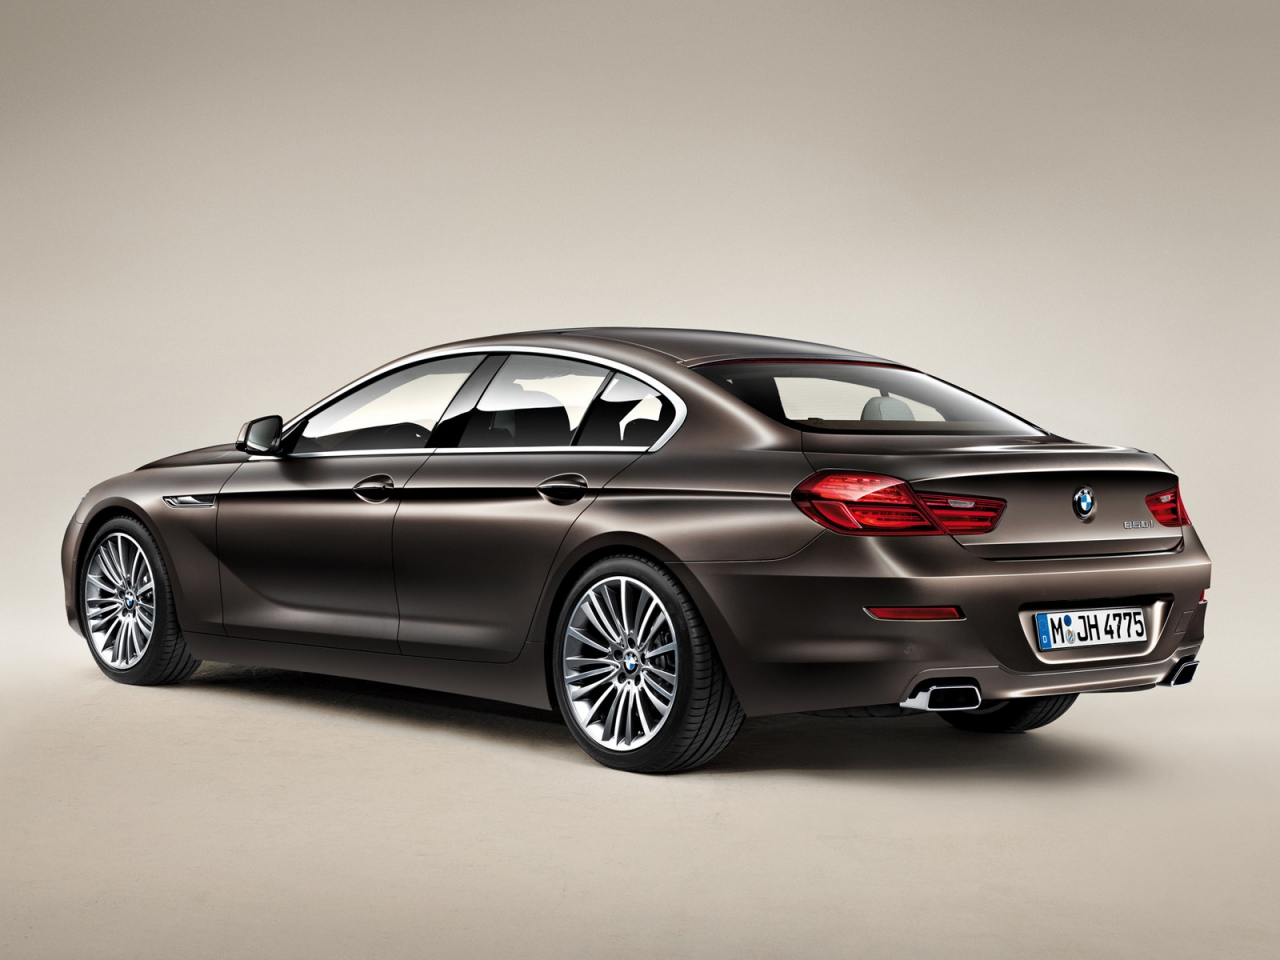 2013 BMW 6 Series Rear for 1280 x 960 resolution